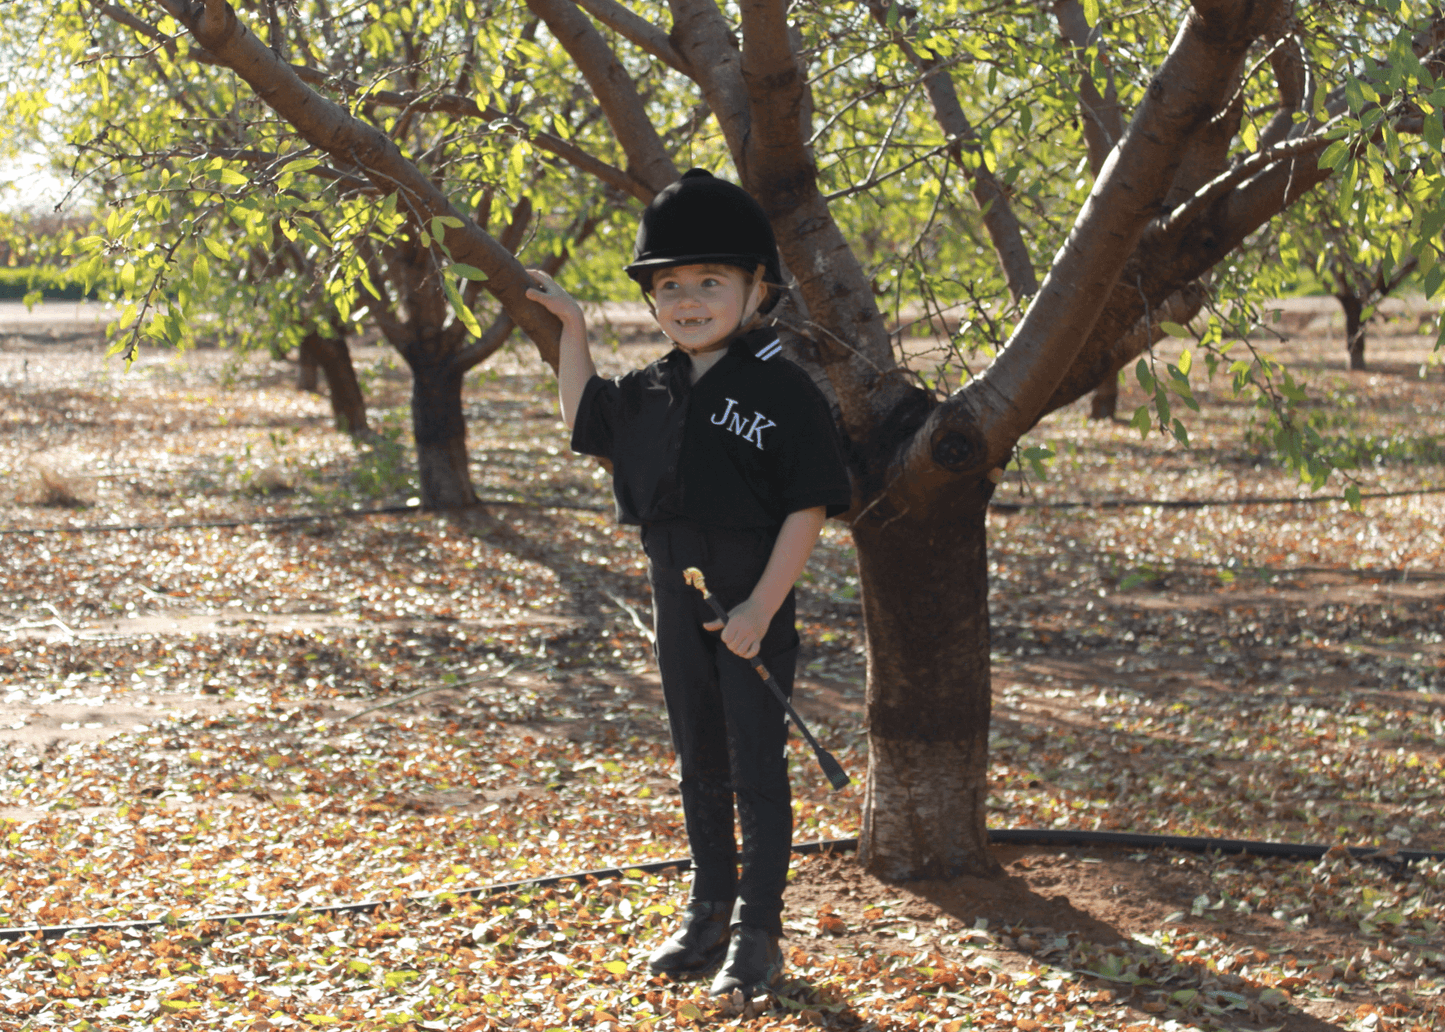 Child in horse riding tights and helmet stands under leafy tree.